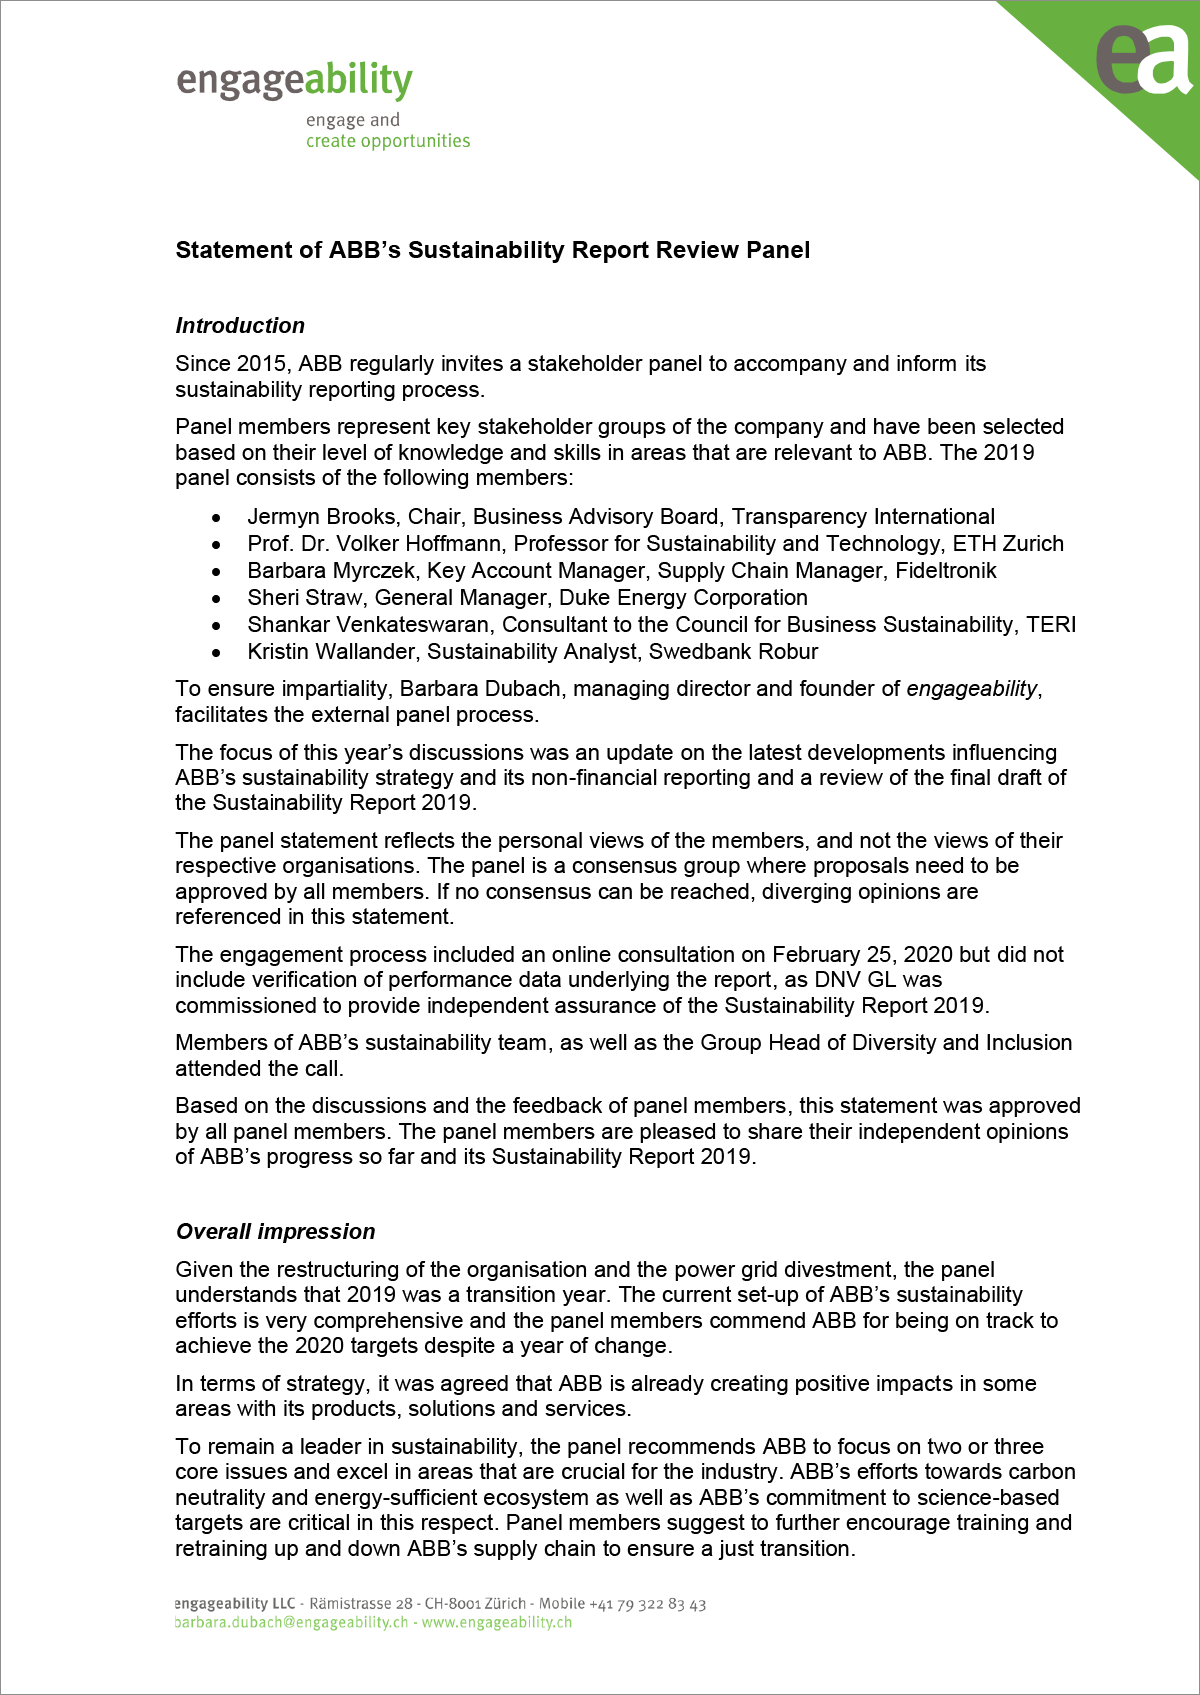 ABB Stakeholder Panel statement – page 1 of 3 (document)